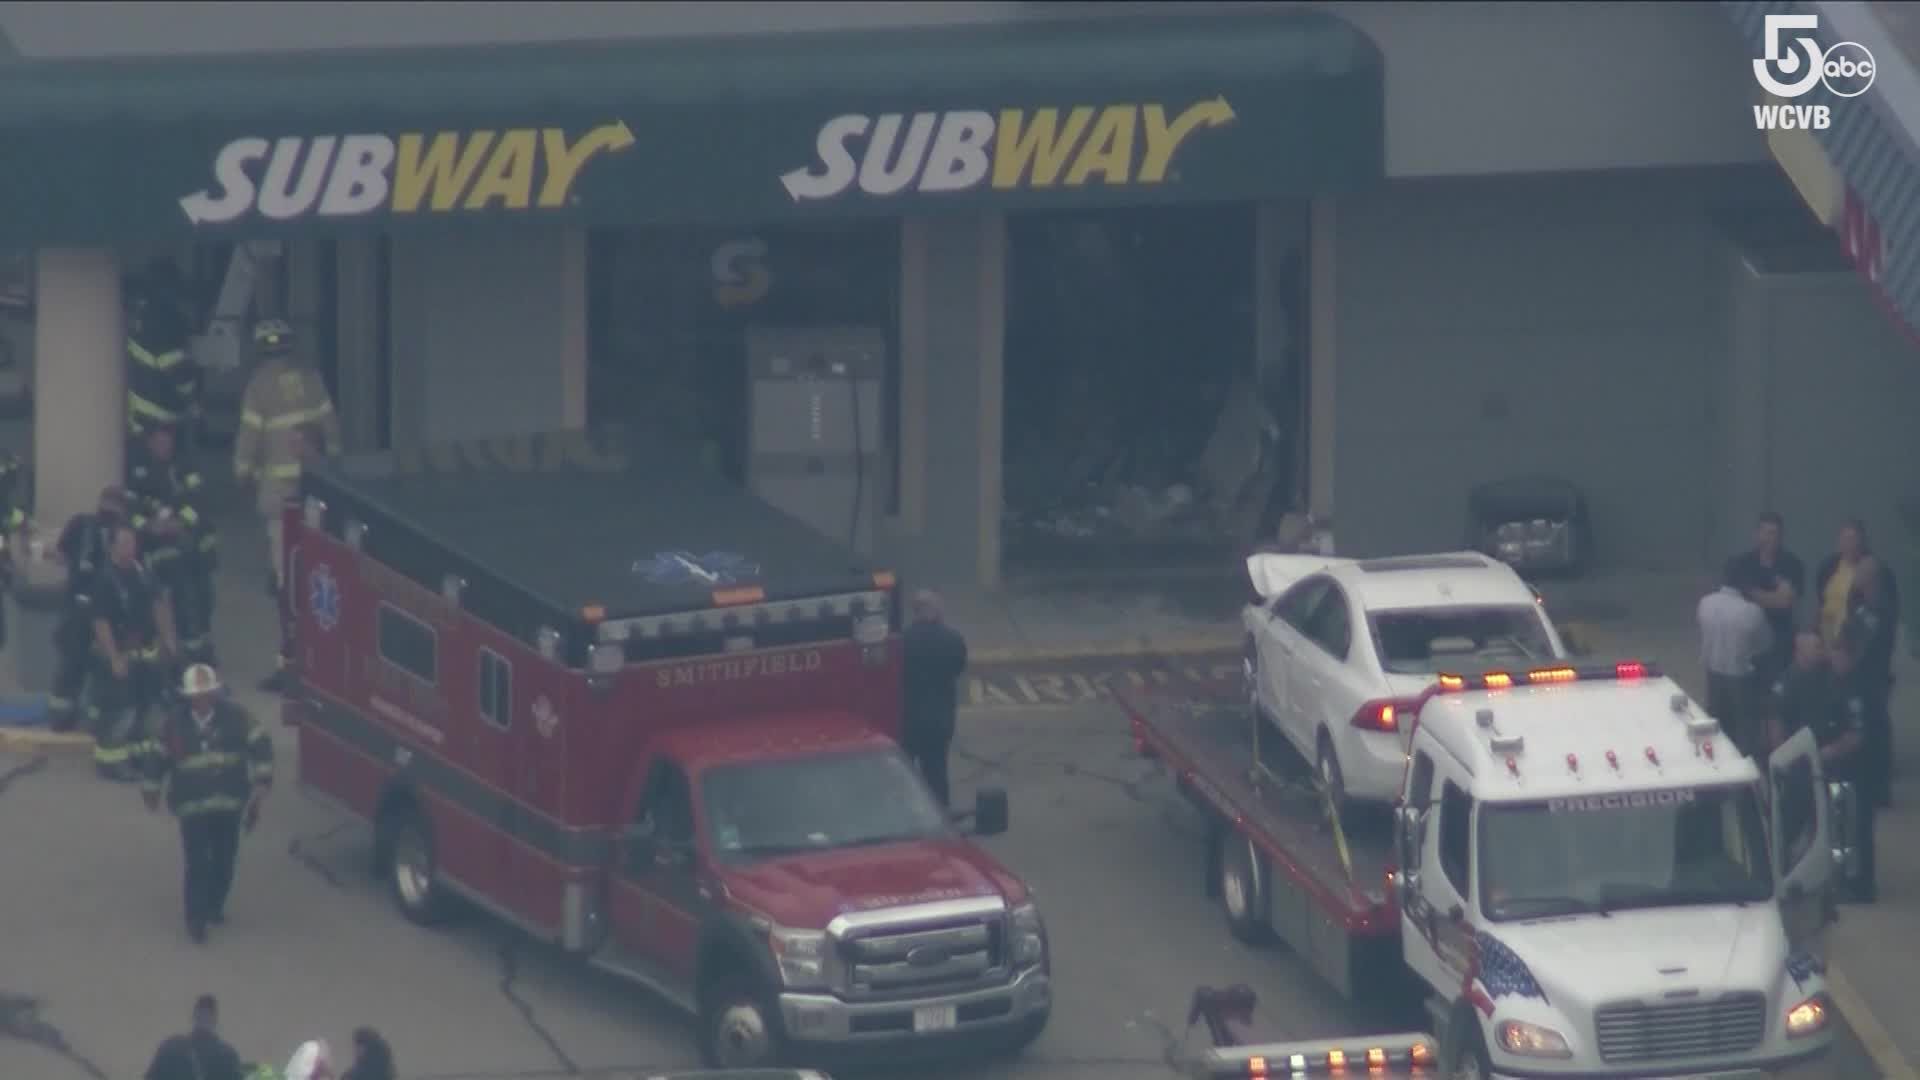 1 dead, 4 injured in Rhode Island after car plows into Subway restaurant